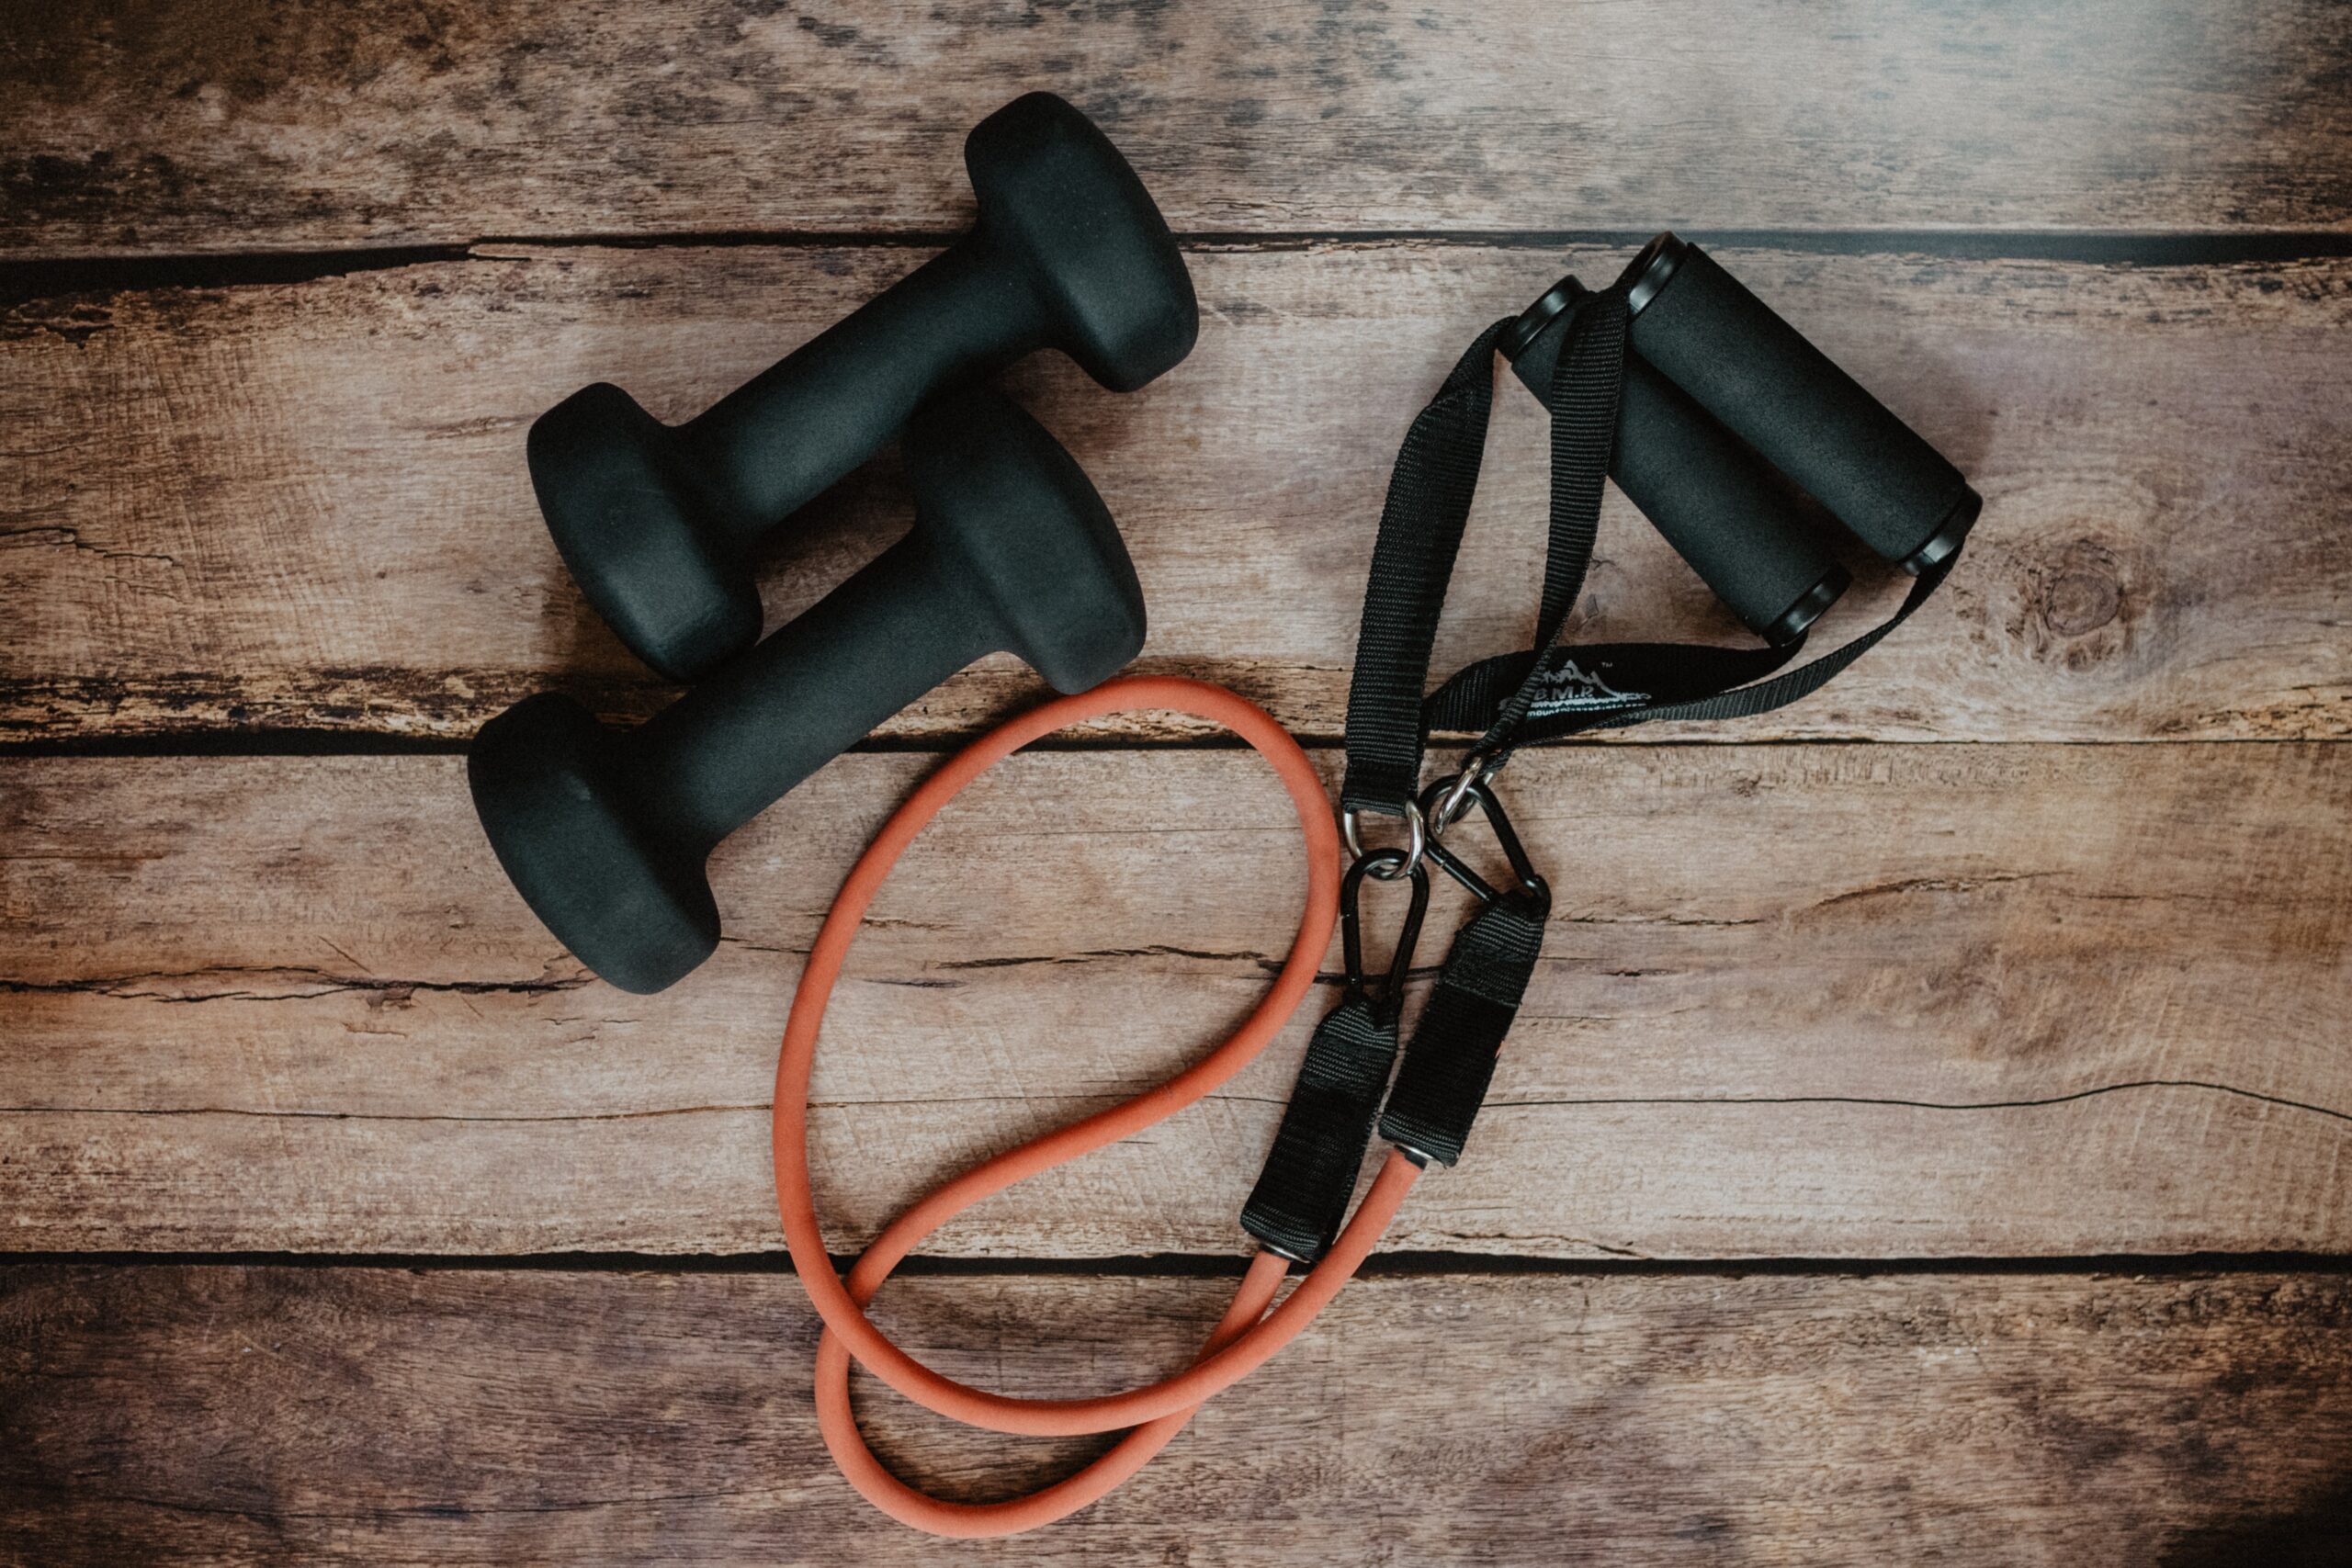 two black dumbbells and a bungee cord resistance band 